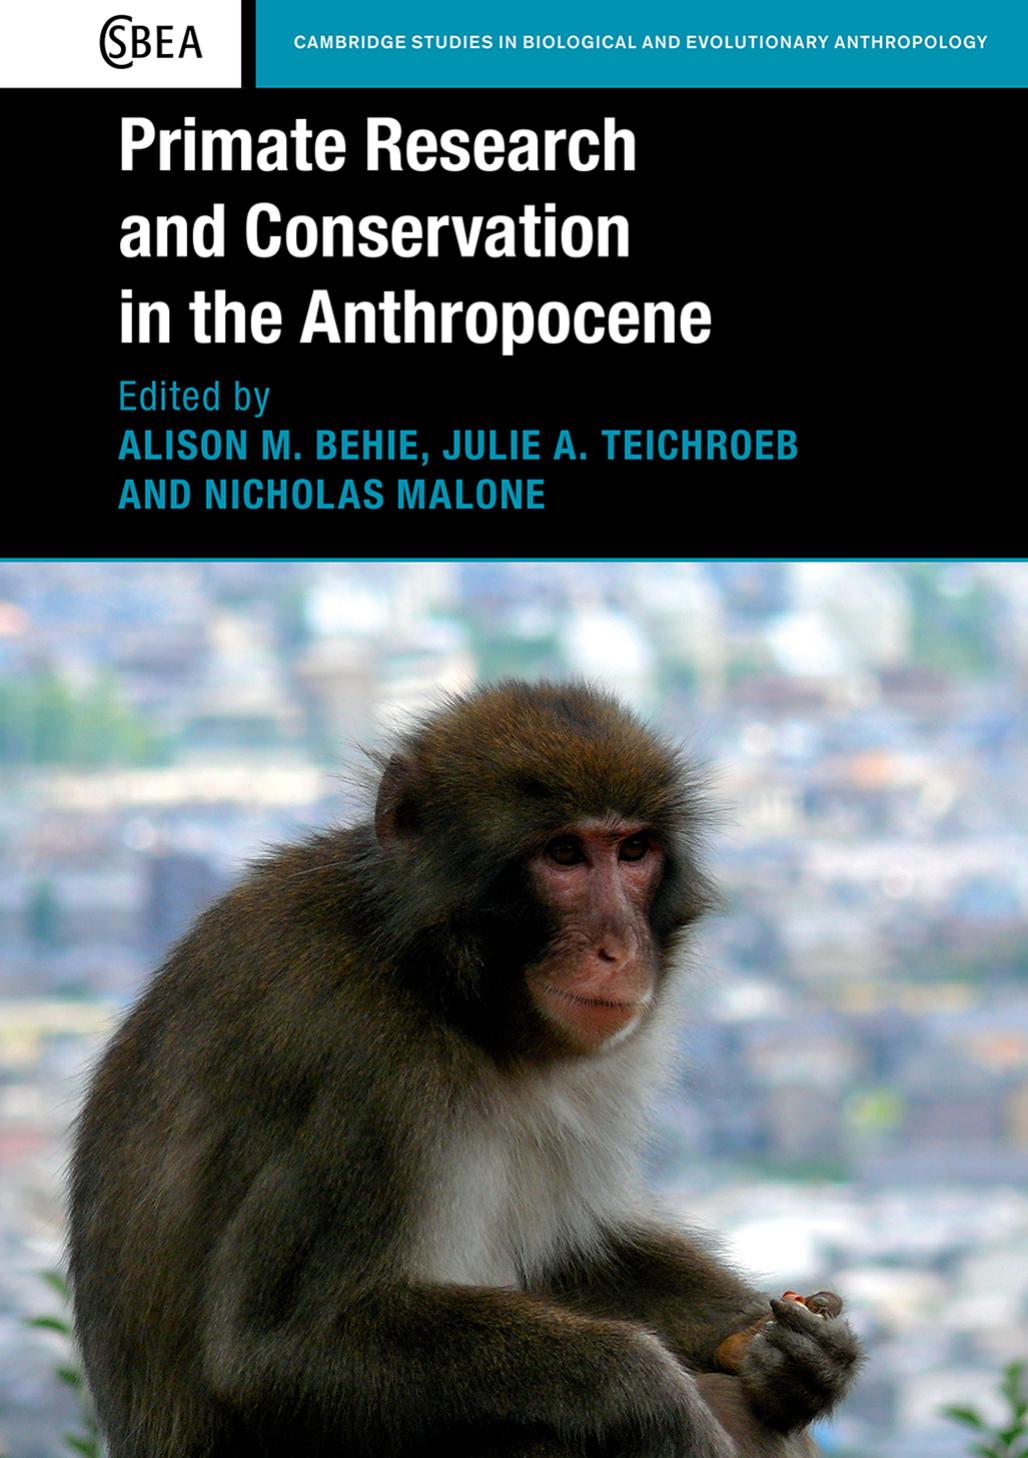 Primate Research and Conservation in the Anthropocene by Alison M. Behie Julie A. Teichroeb and Nicholas Malone